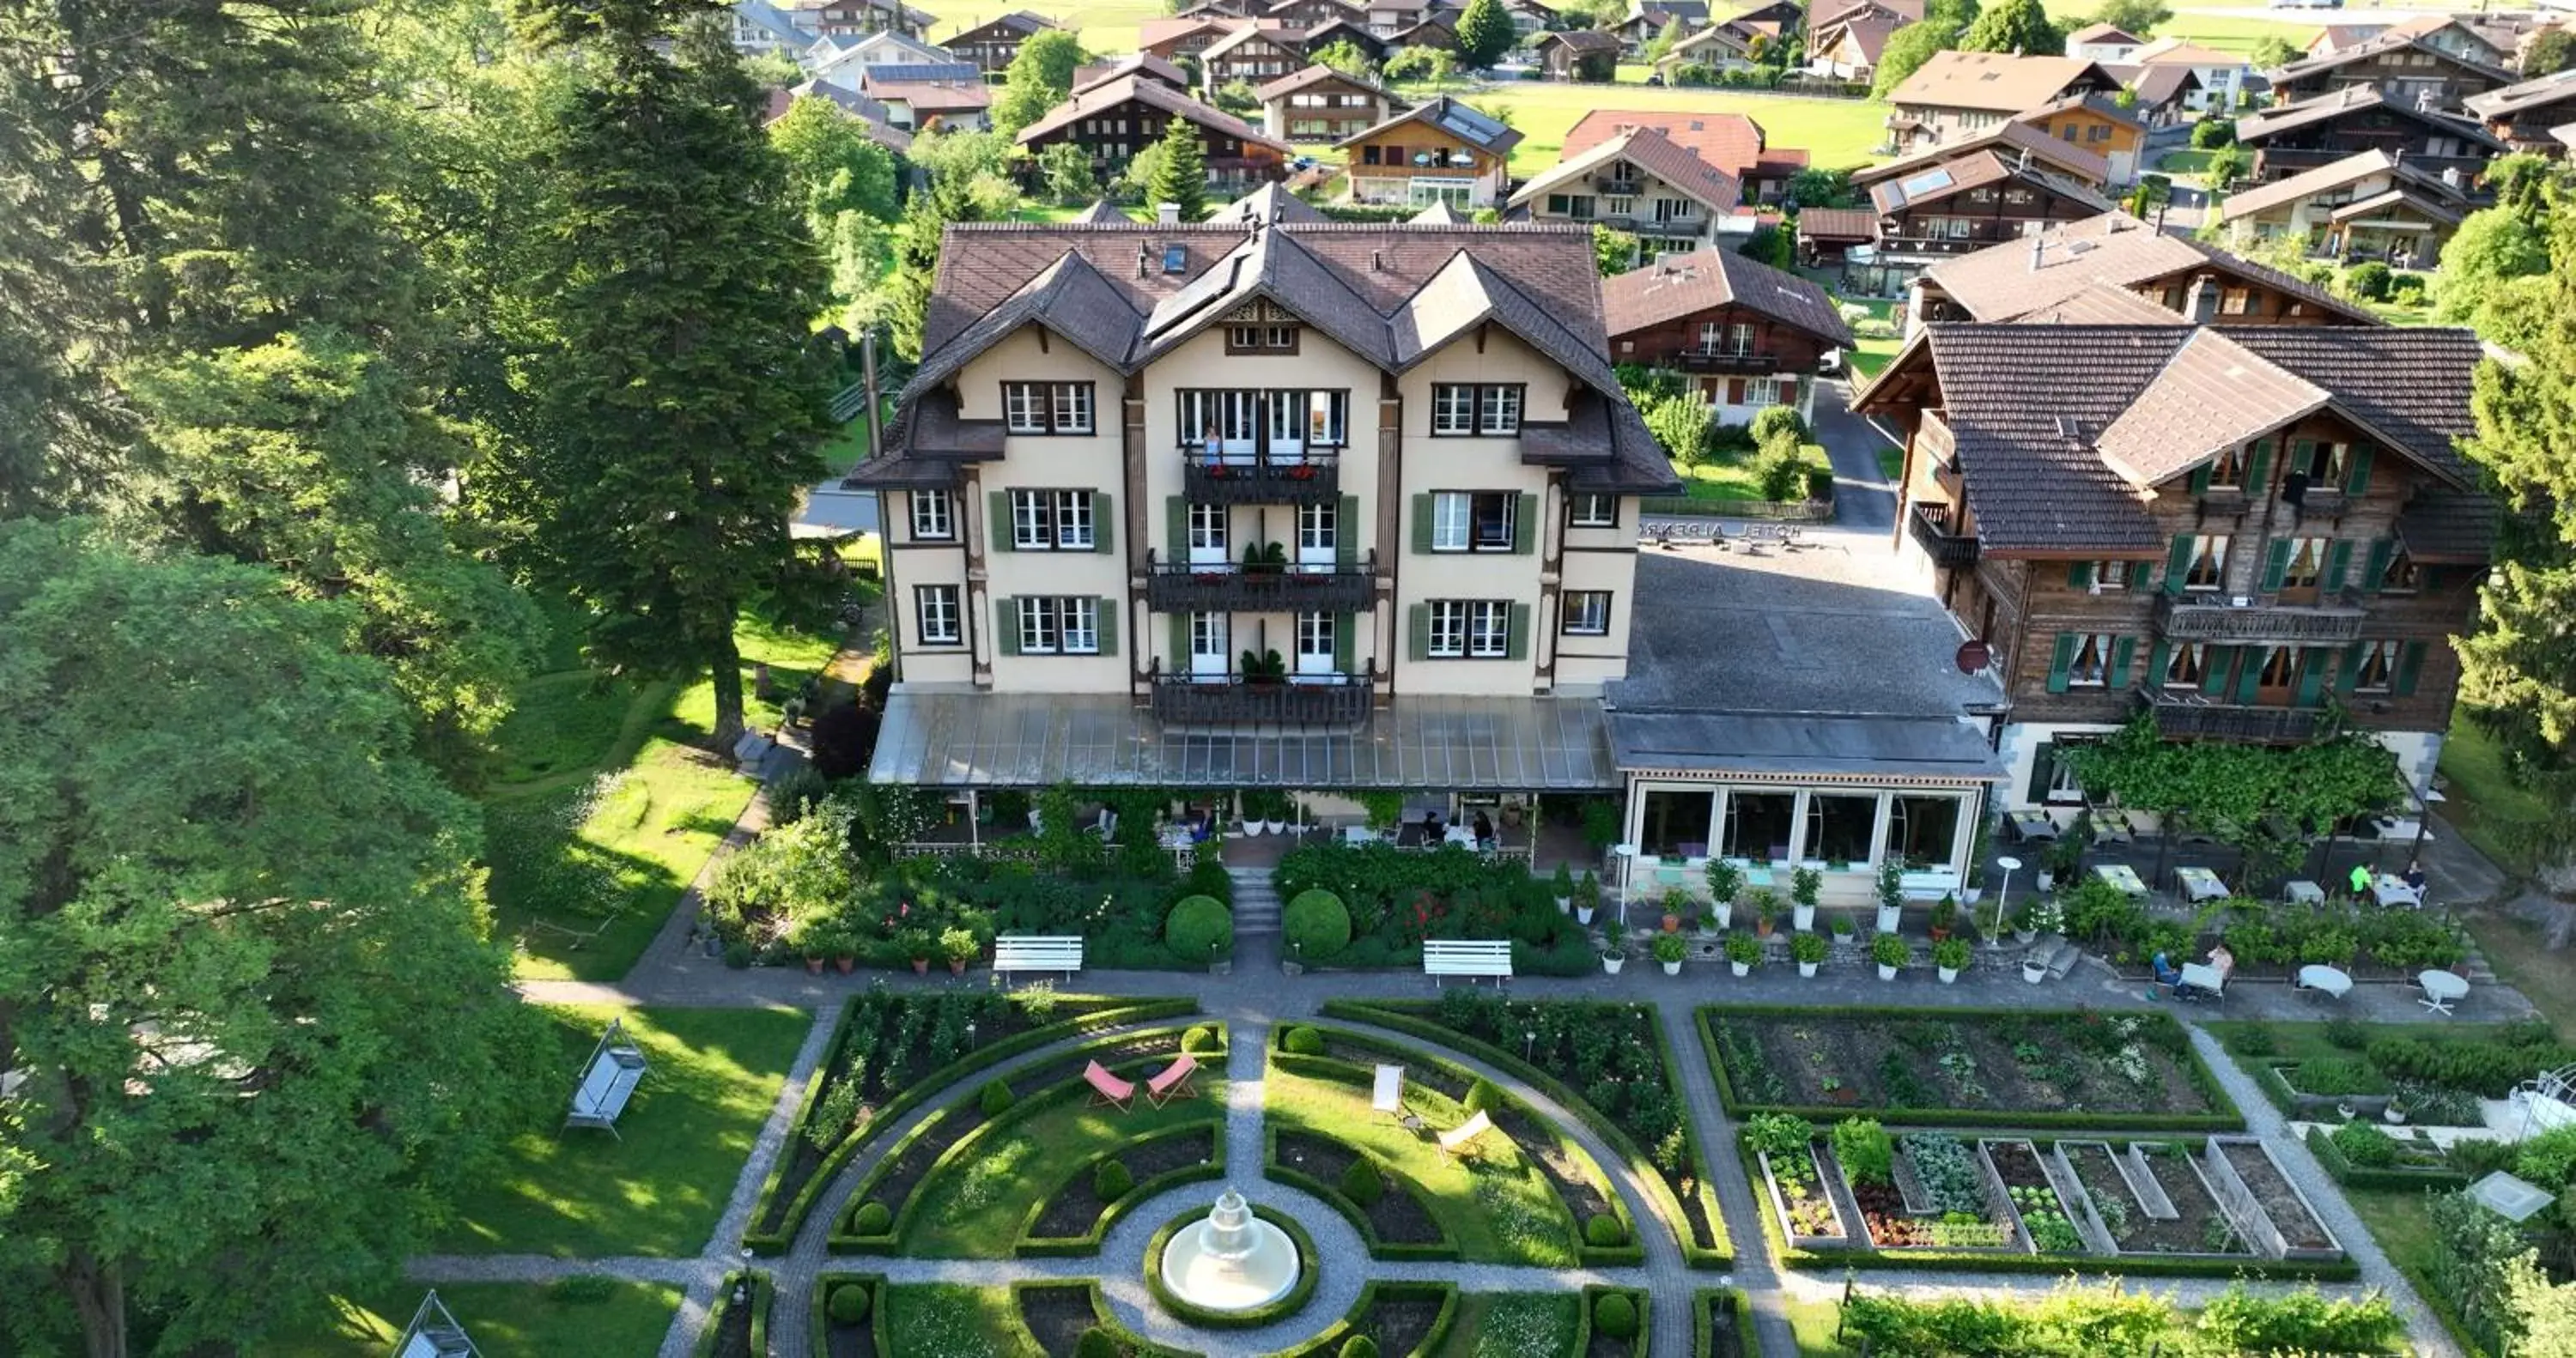 Property building, Bird's-eye View in Alpenrose Hotel and Gardens